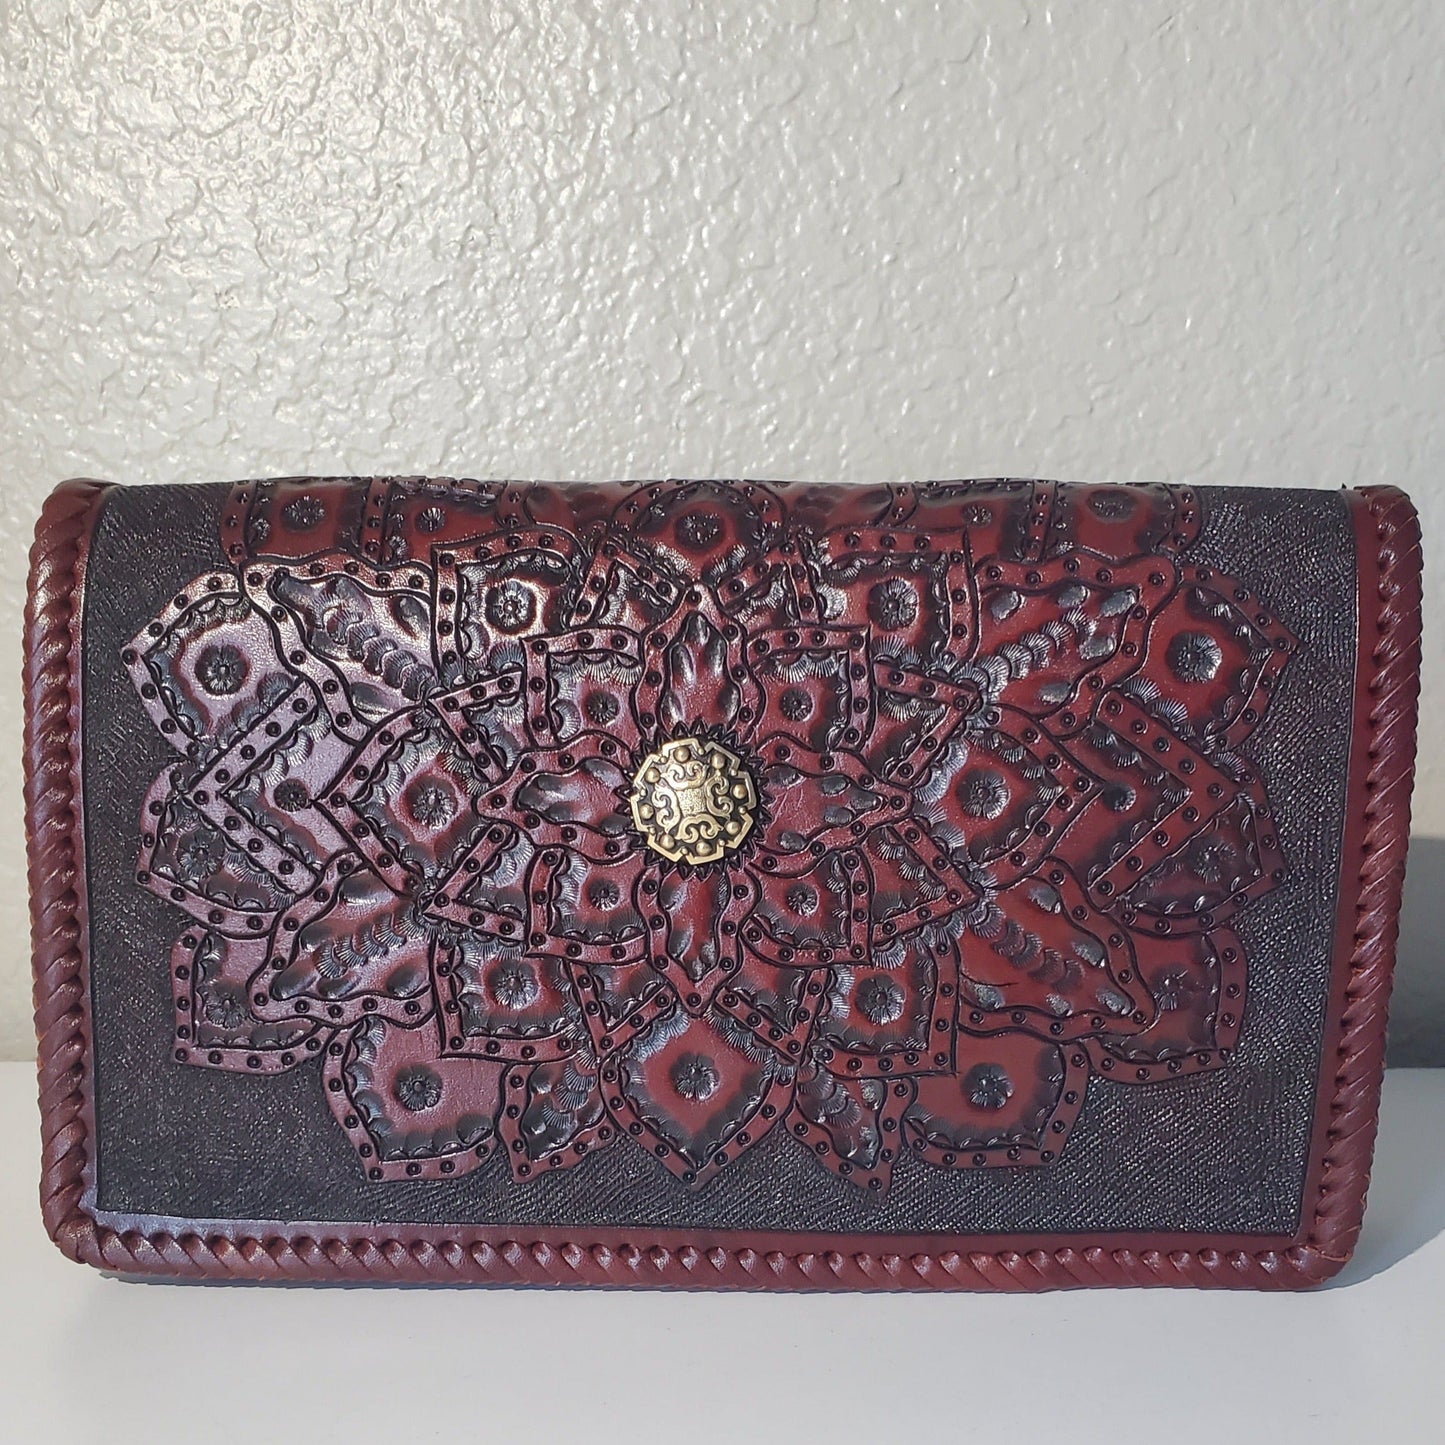 Hand Made Leather Crossbody Bag "CECELIA" by MIOHERMOSA Brown Cecelia Mayan Flower